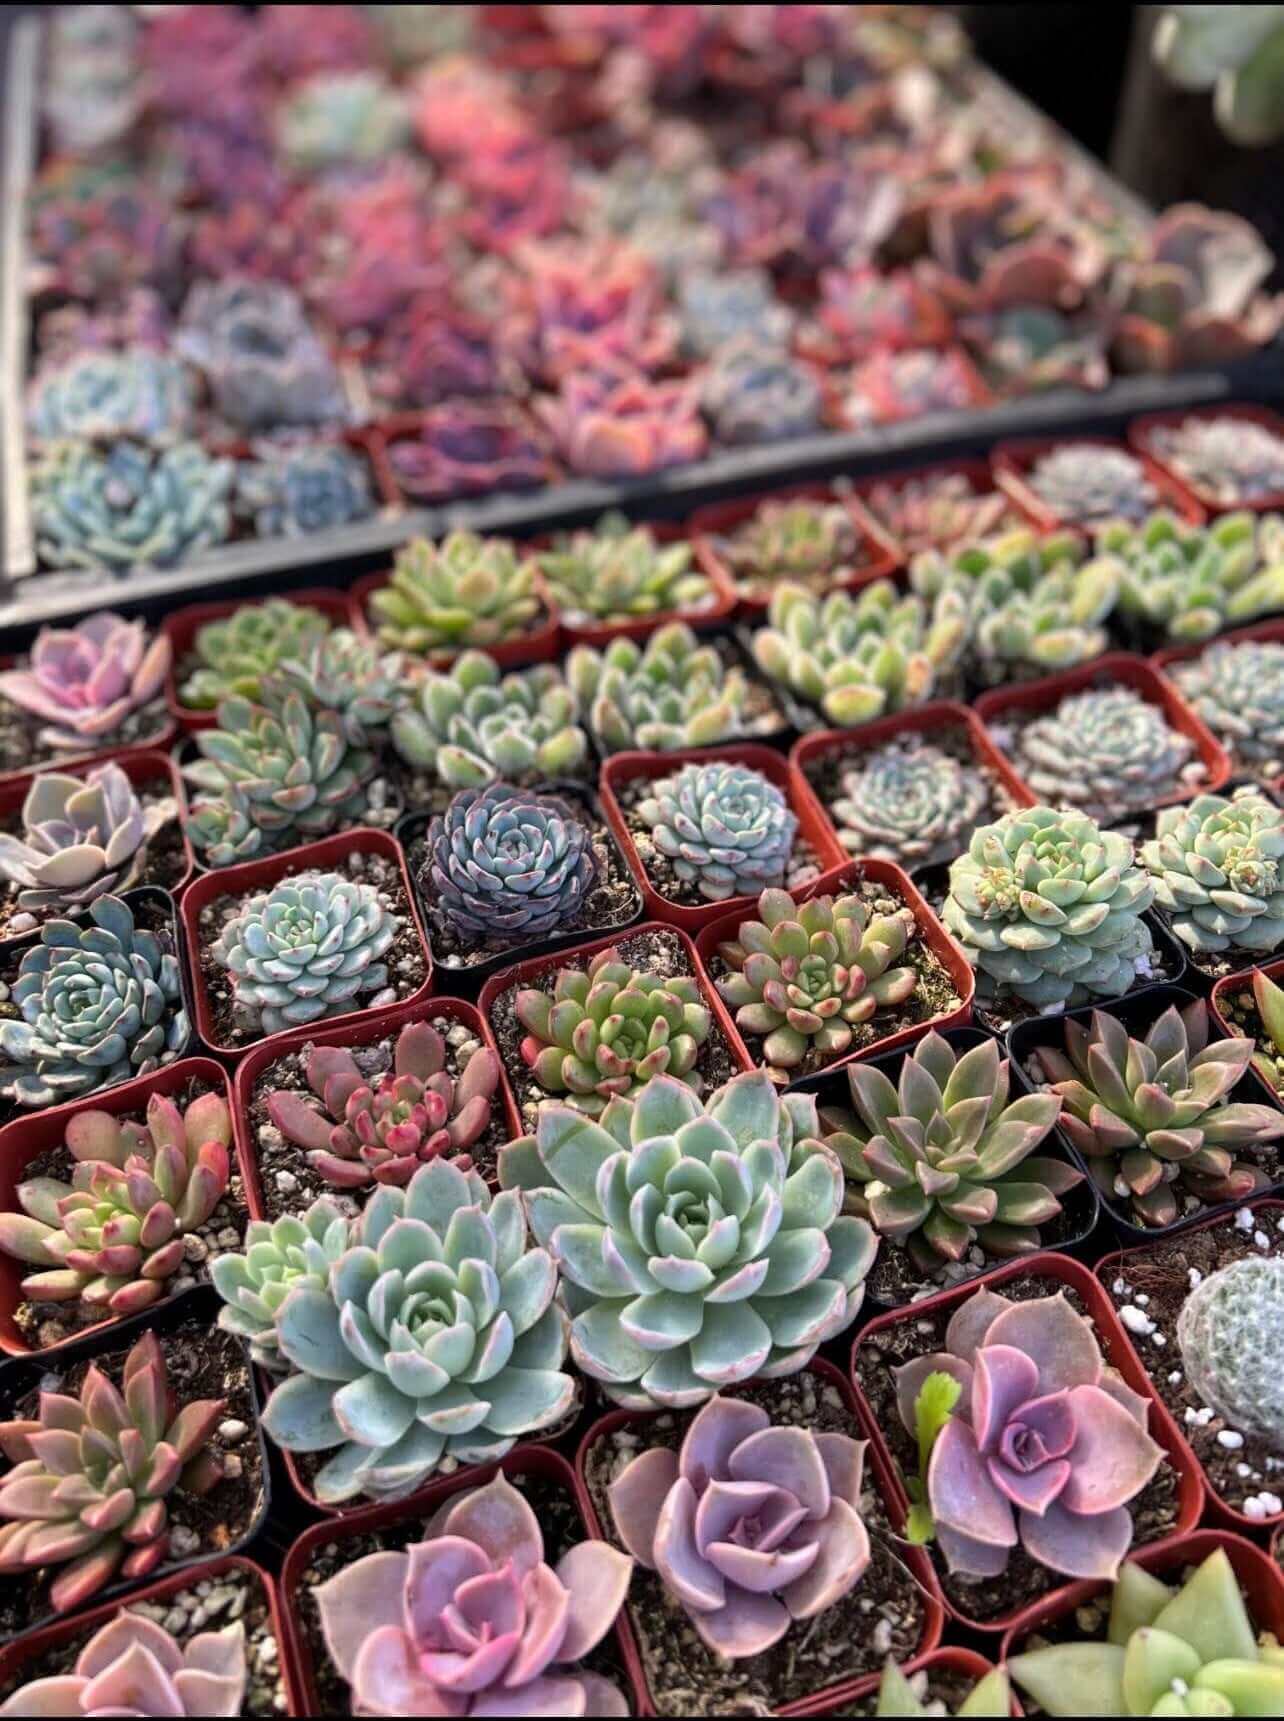 Hand-picked selection of 2-inch succulents, grown and shipped from Southern California, with a focus on quality and color.